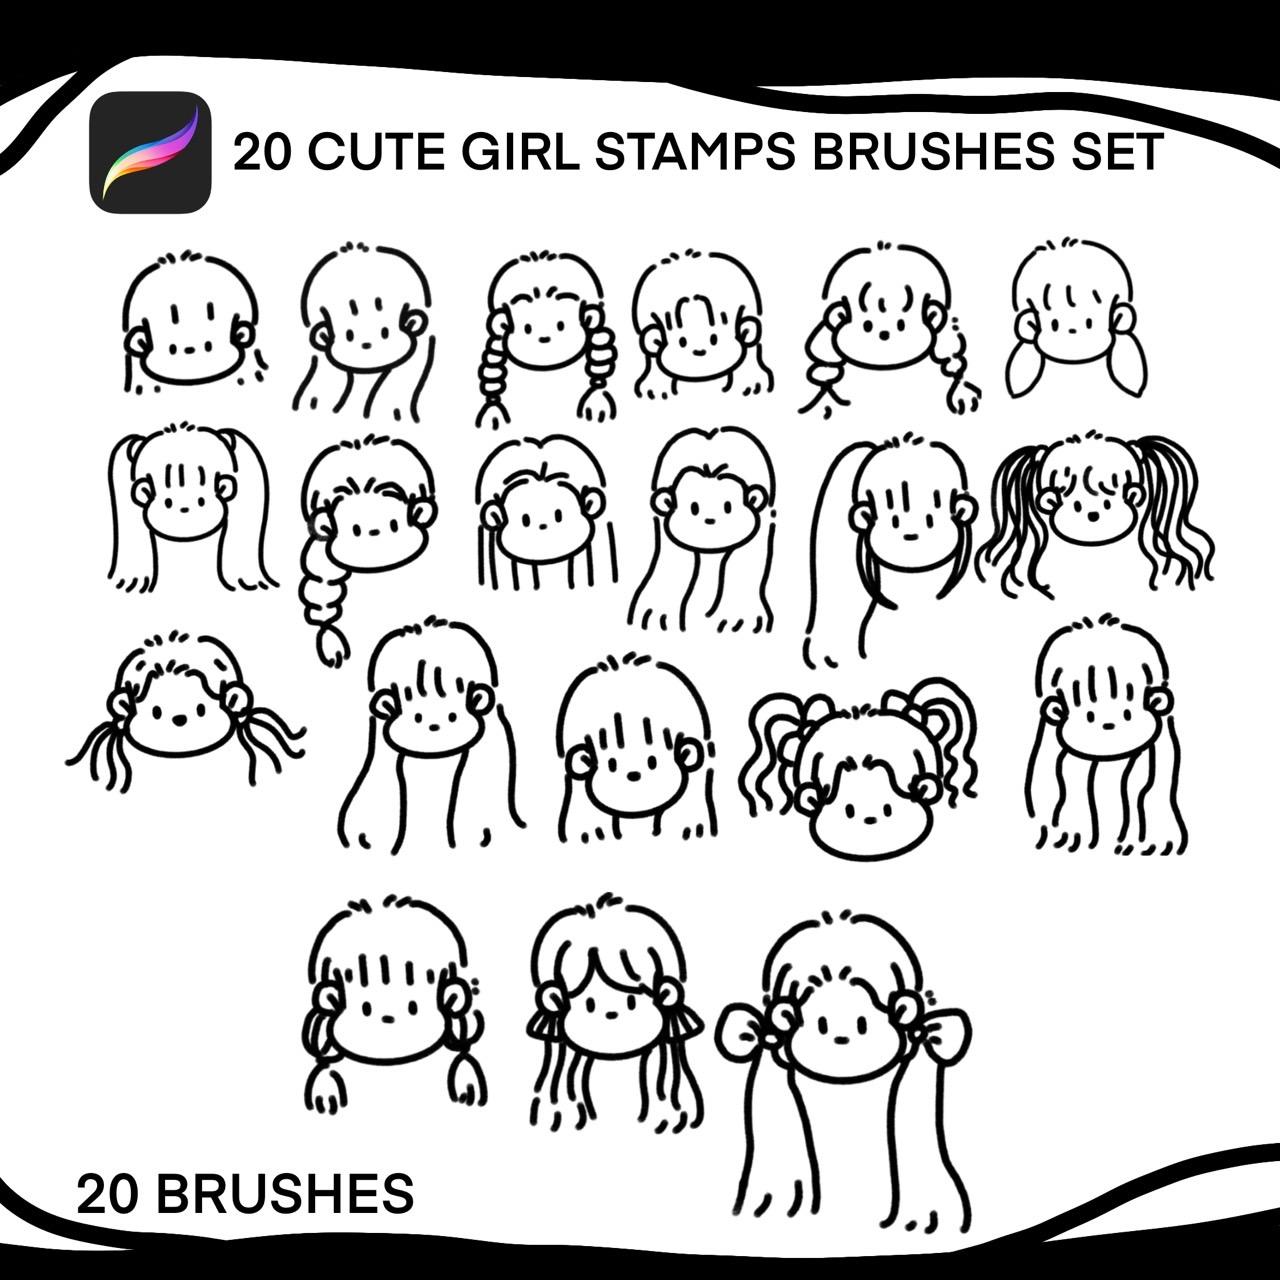 20 CUTE GIRL STAMPS BRUSHES SET